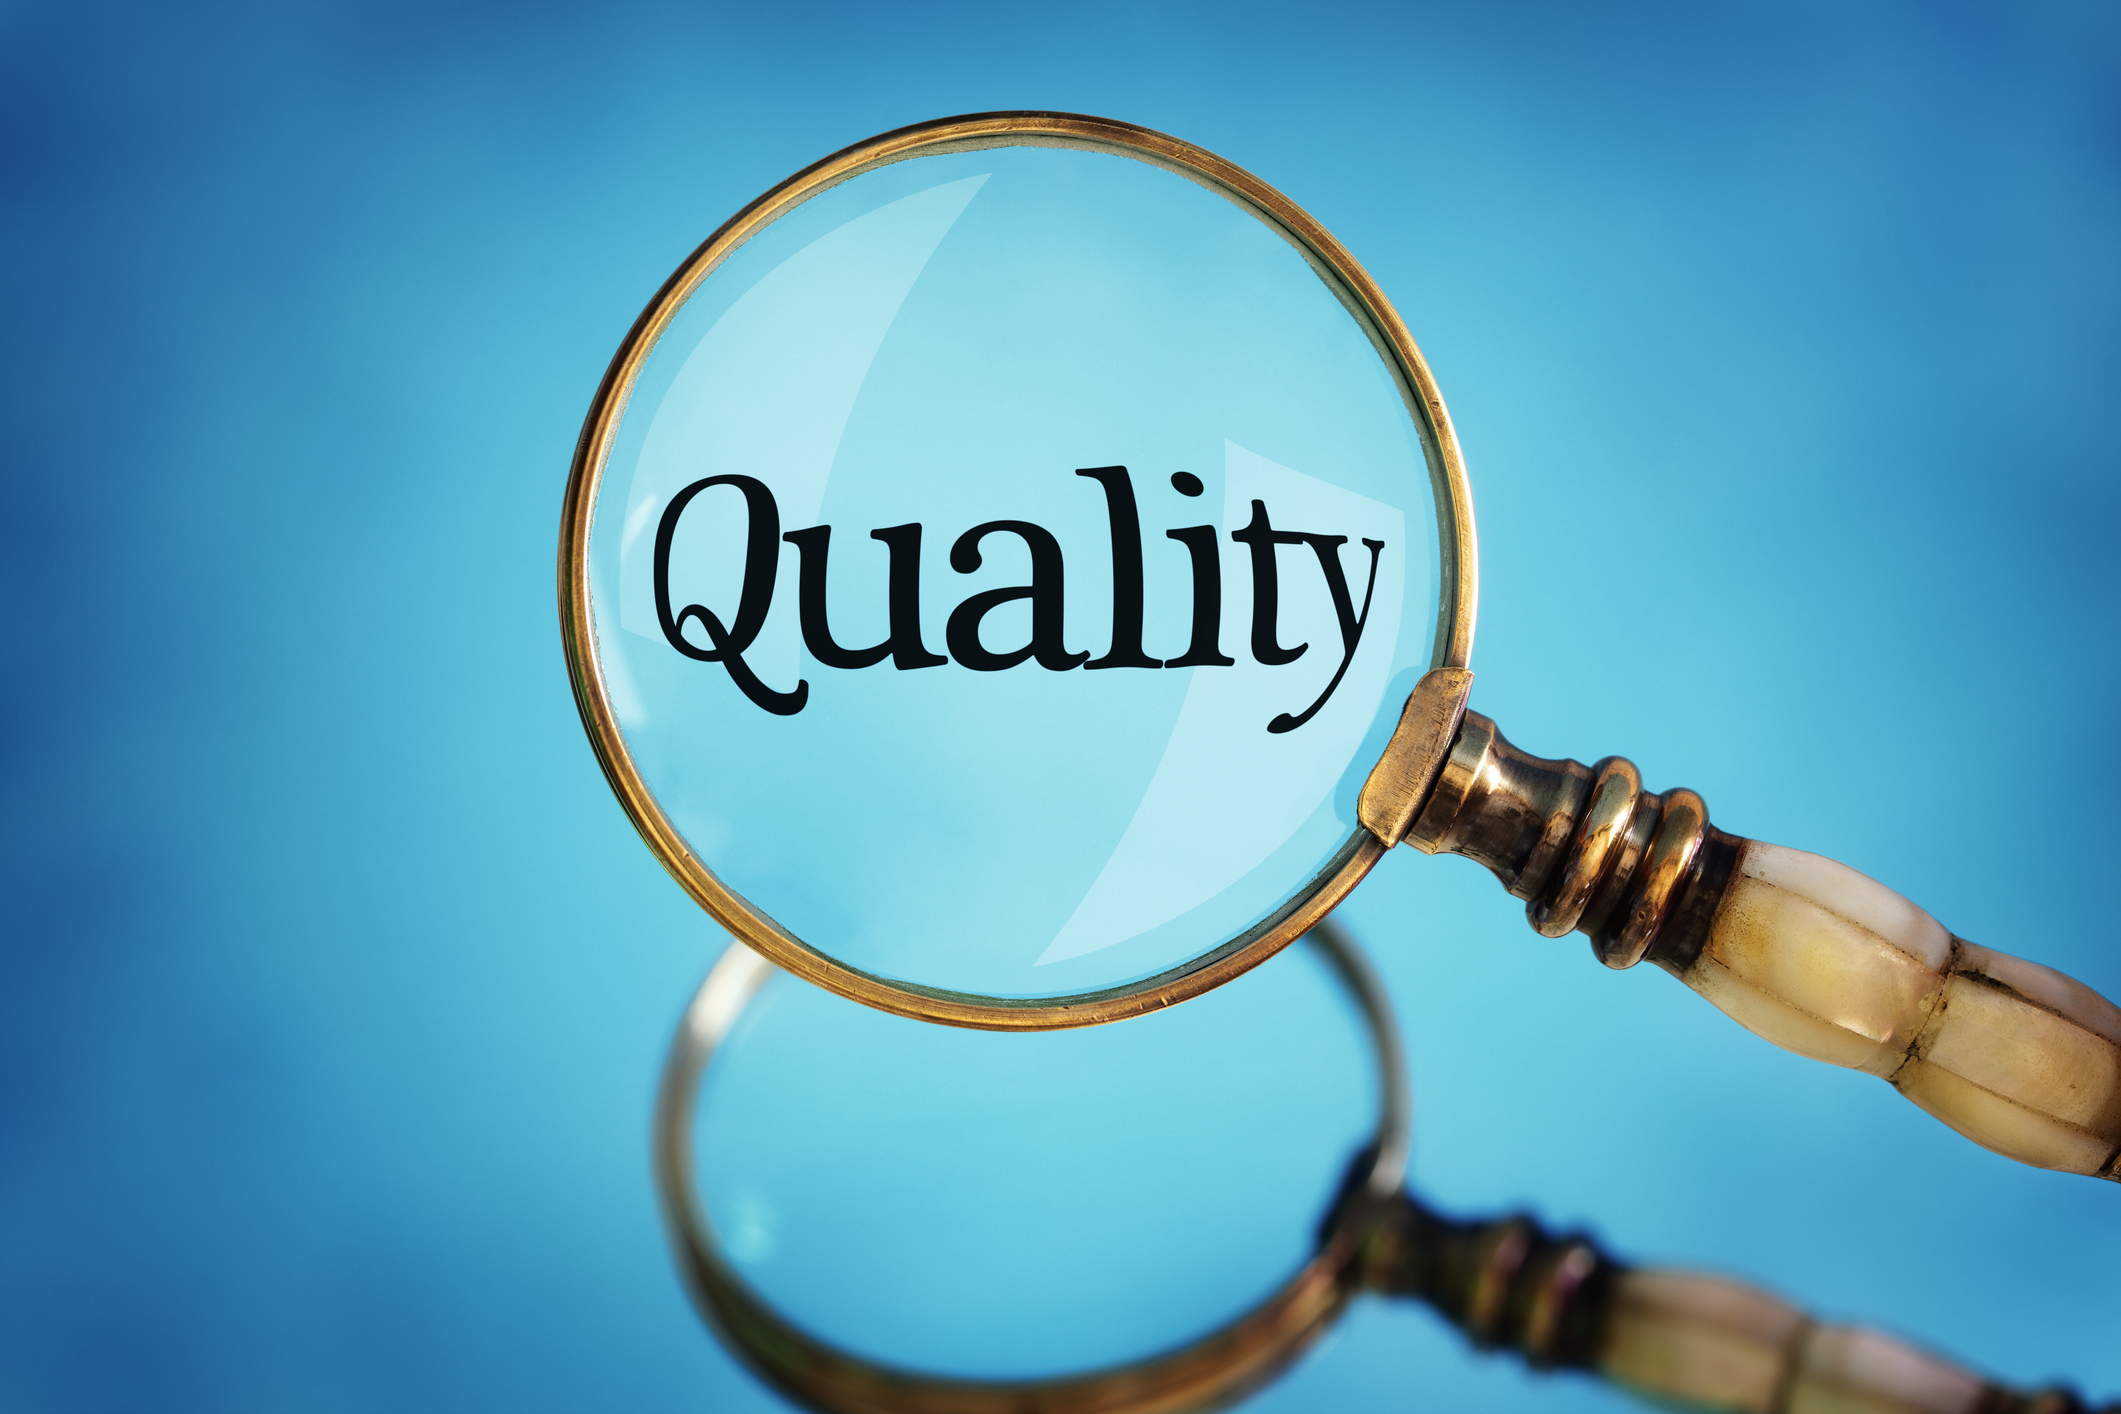 Magnifying glass focus on word quality concept for quality control, customer satisfaction and excellence